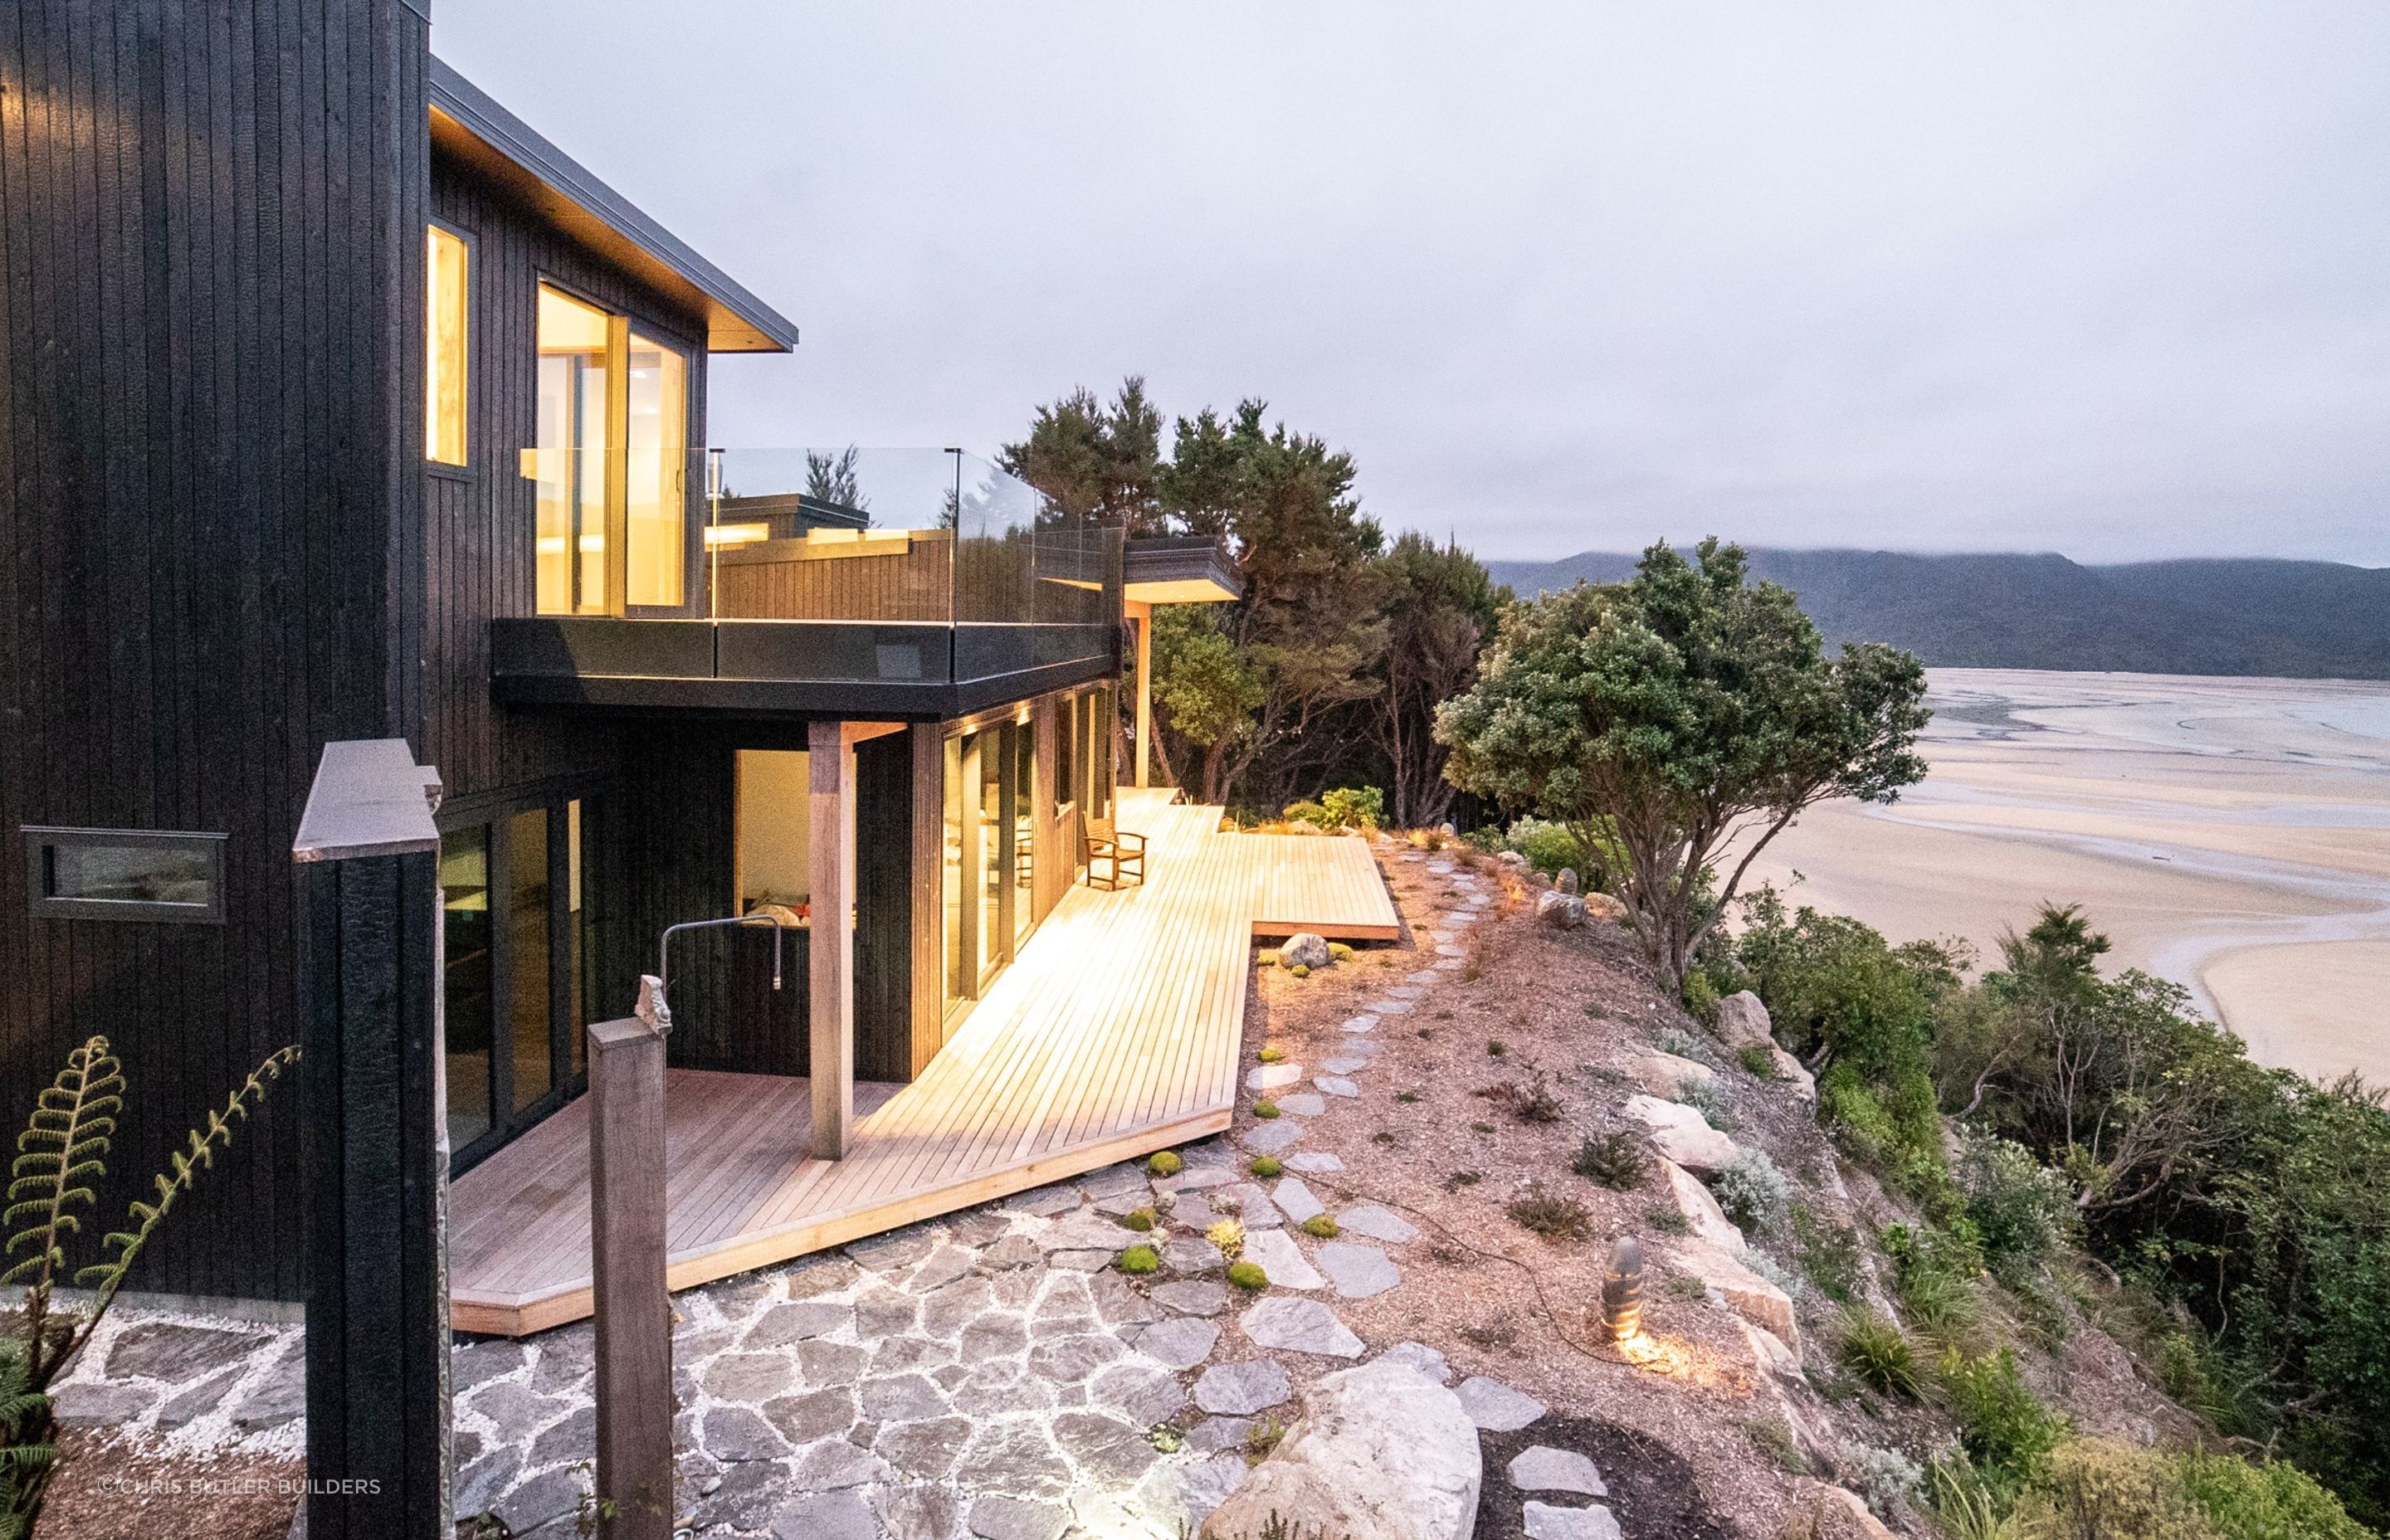 Stone, pebbles and timber — just some of the hardcaping material featured in this stunning coastal home.